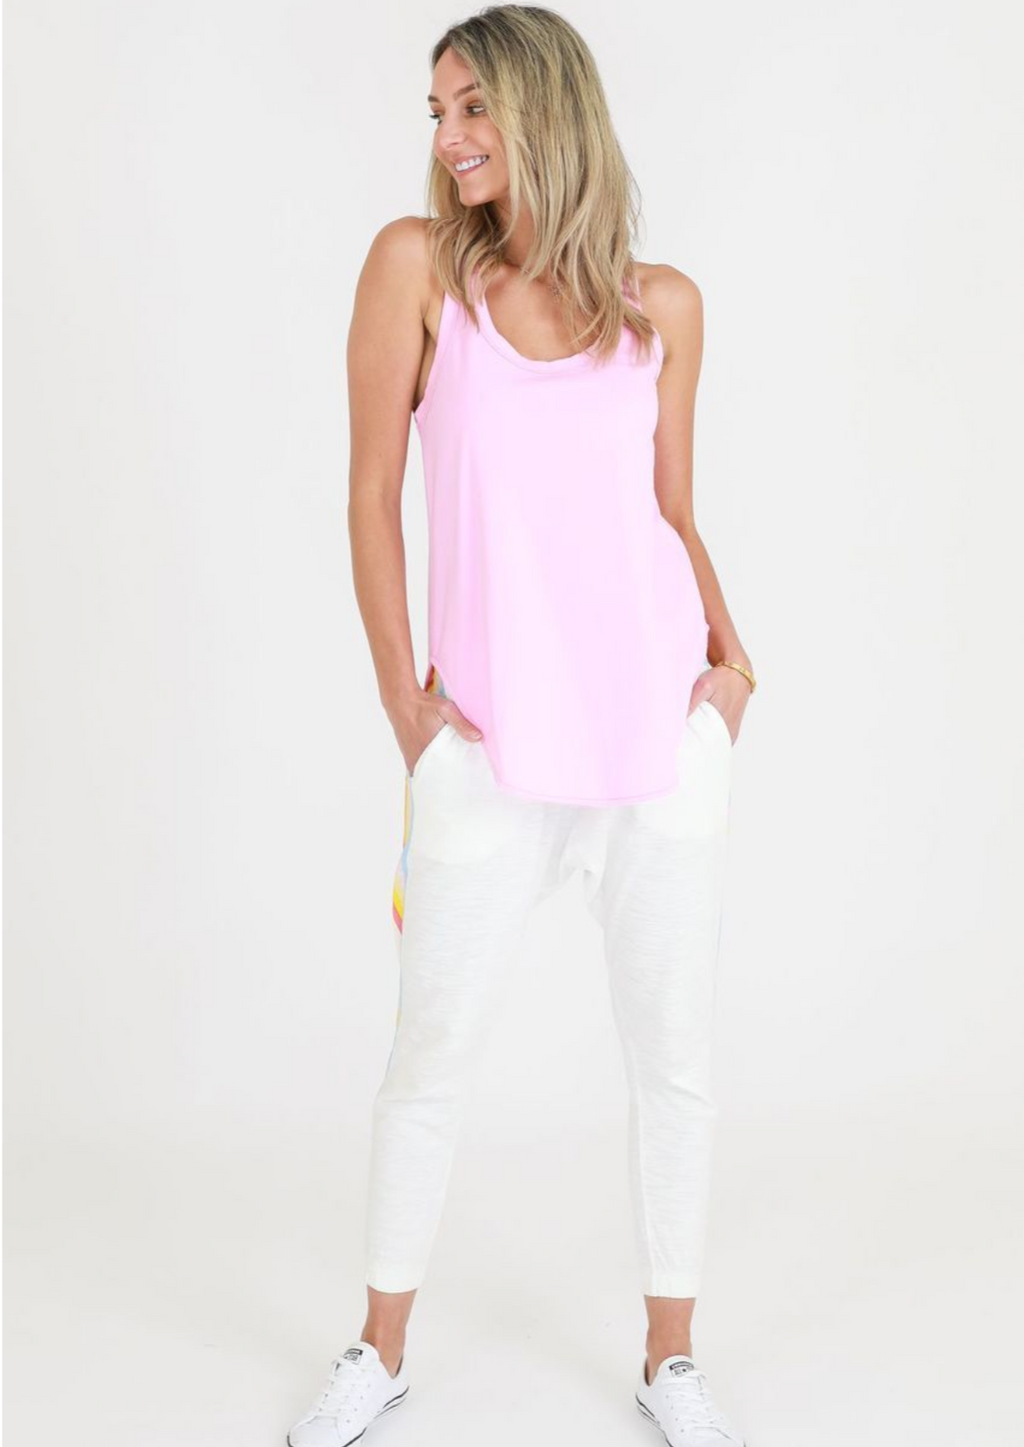 Hamilton Tank - Neon Gum, by 3rd Story  The Hamilton Tank by 3rd Story is a wardrobe staple. A racerback singlet with a scooped neckline, the Hamilton Tank is perfectly styled as a layering piece or worn on its own.  It has a rounded hem that has a slightly longer length - front and back.  Fit: